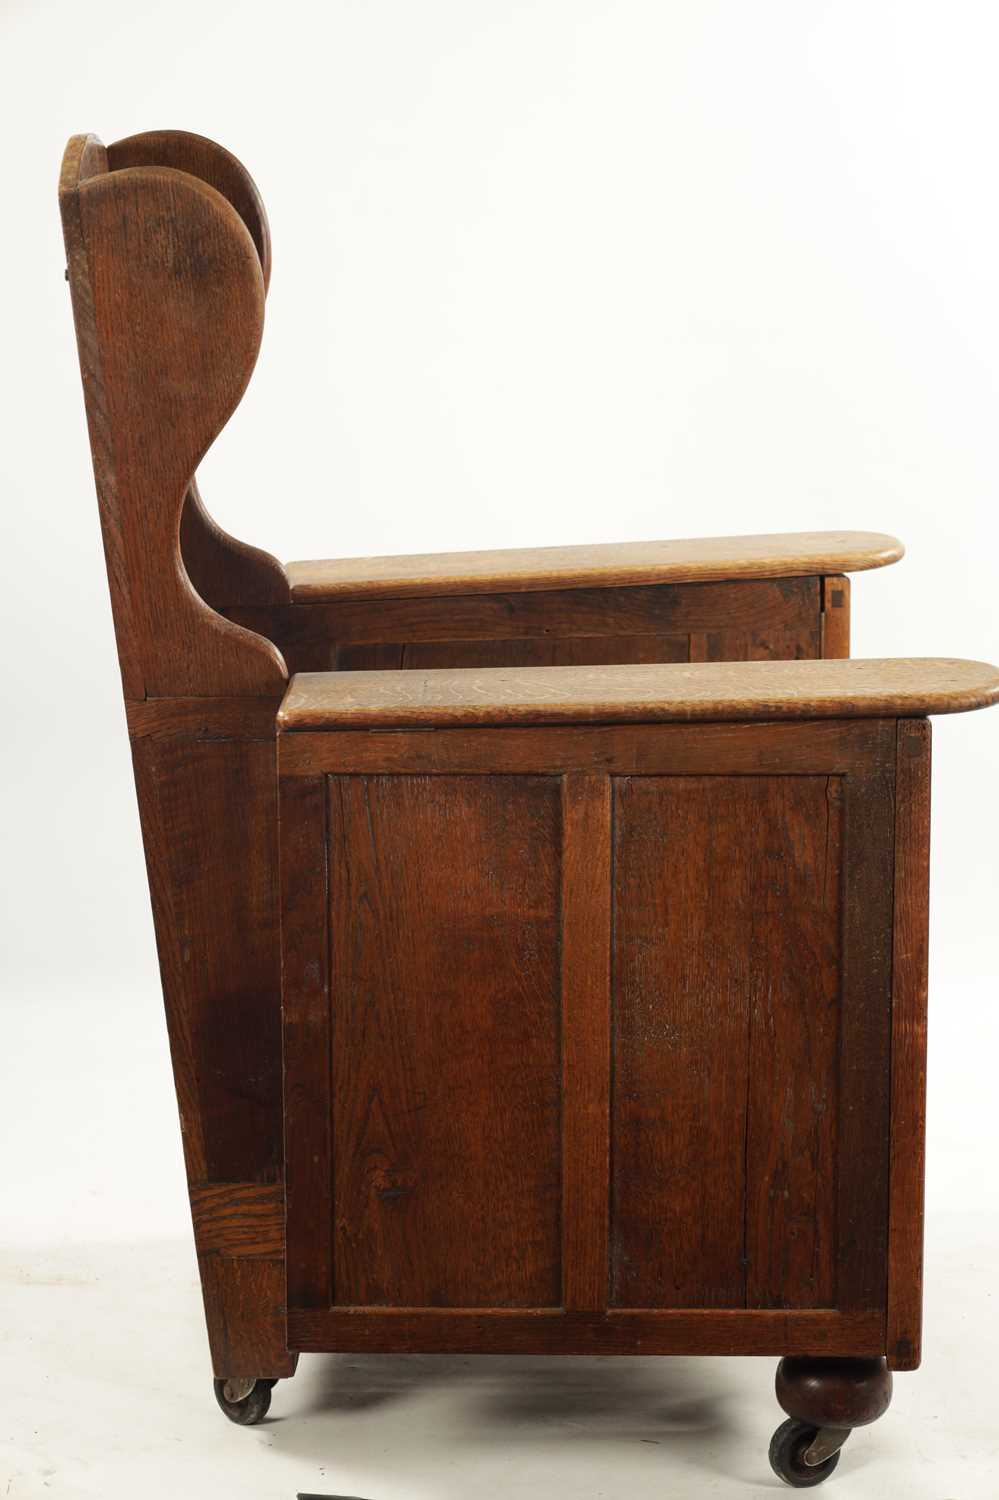 AN ARTS AND CRAFTS METAMORPHIC OAK ARMCHAIR - Image 3 of 7